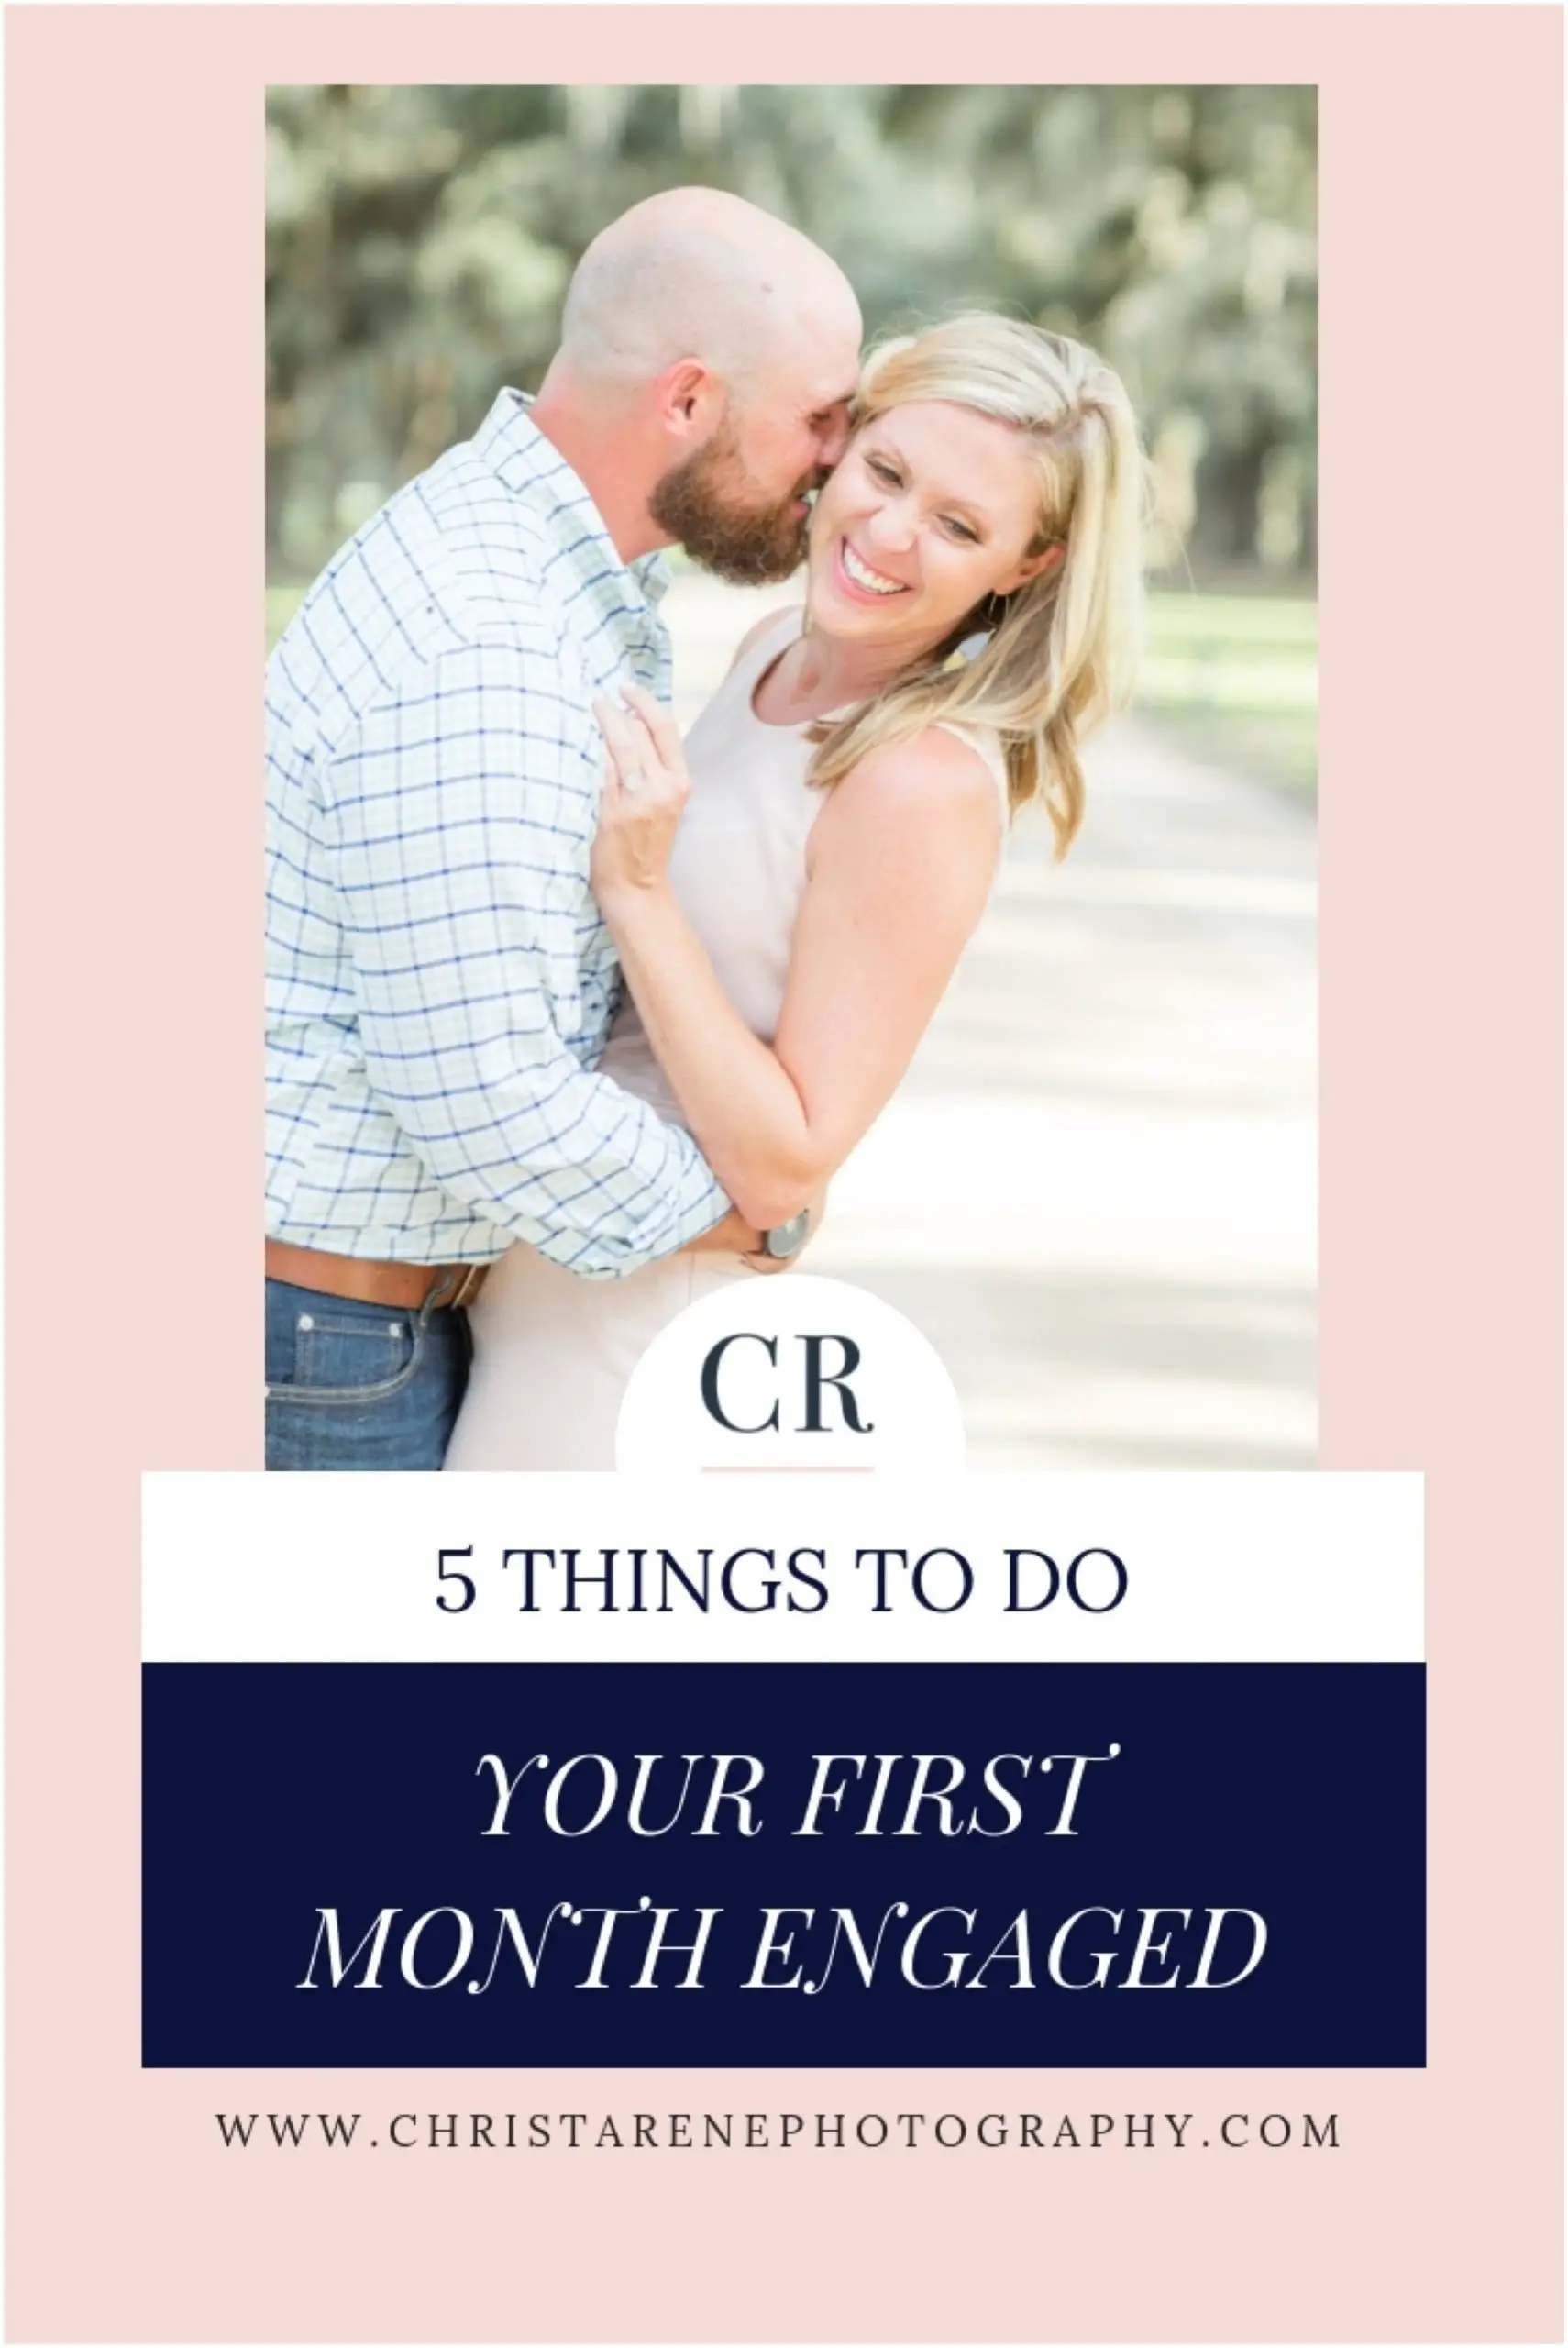 5 Things to do Your First Month Engaged